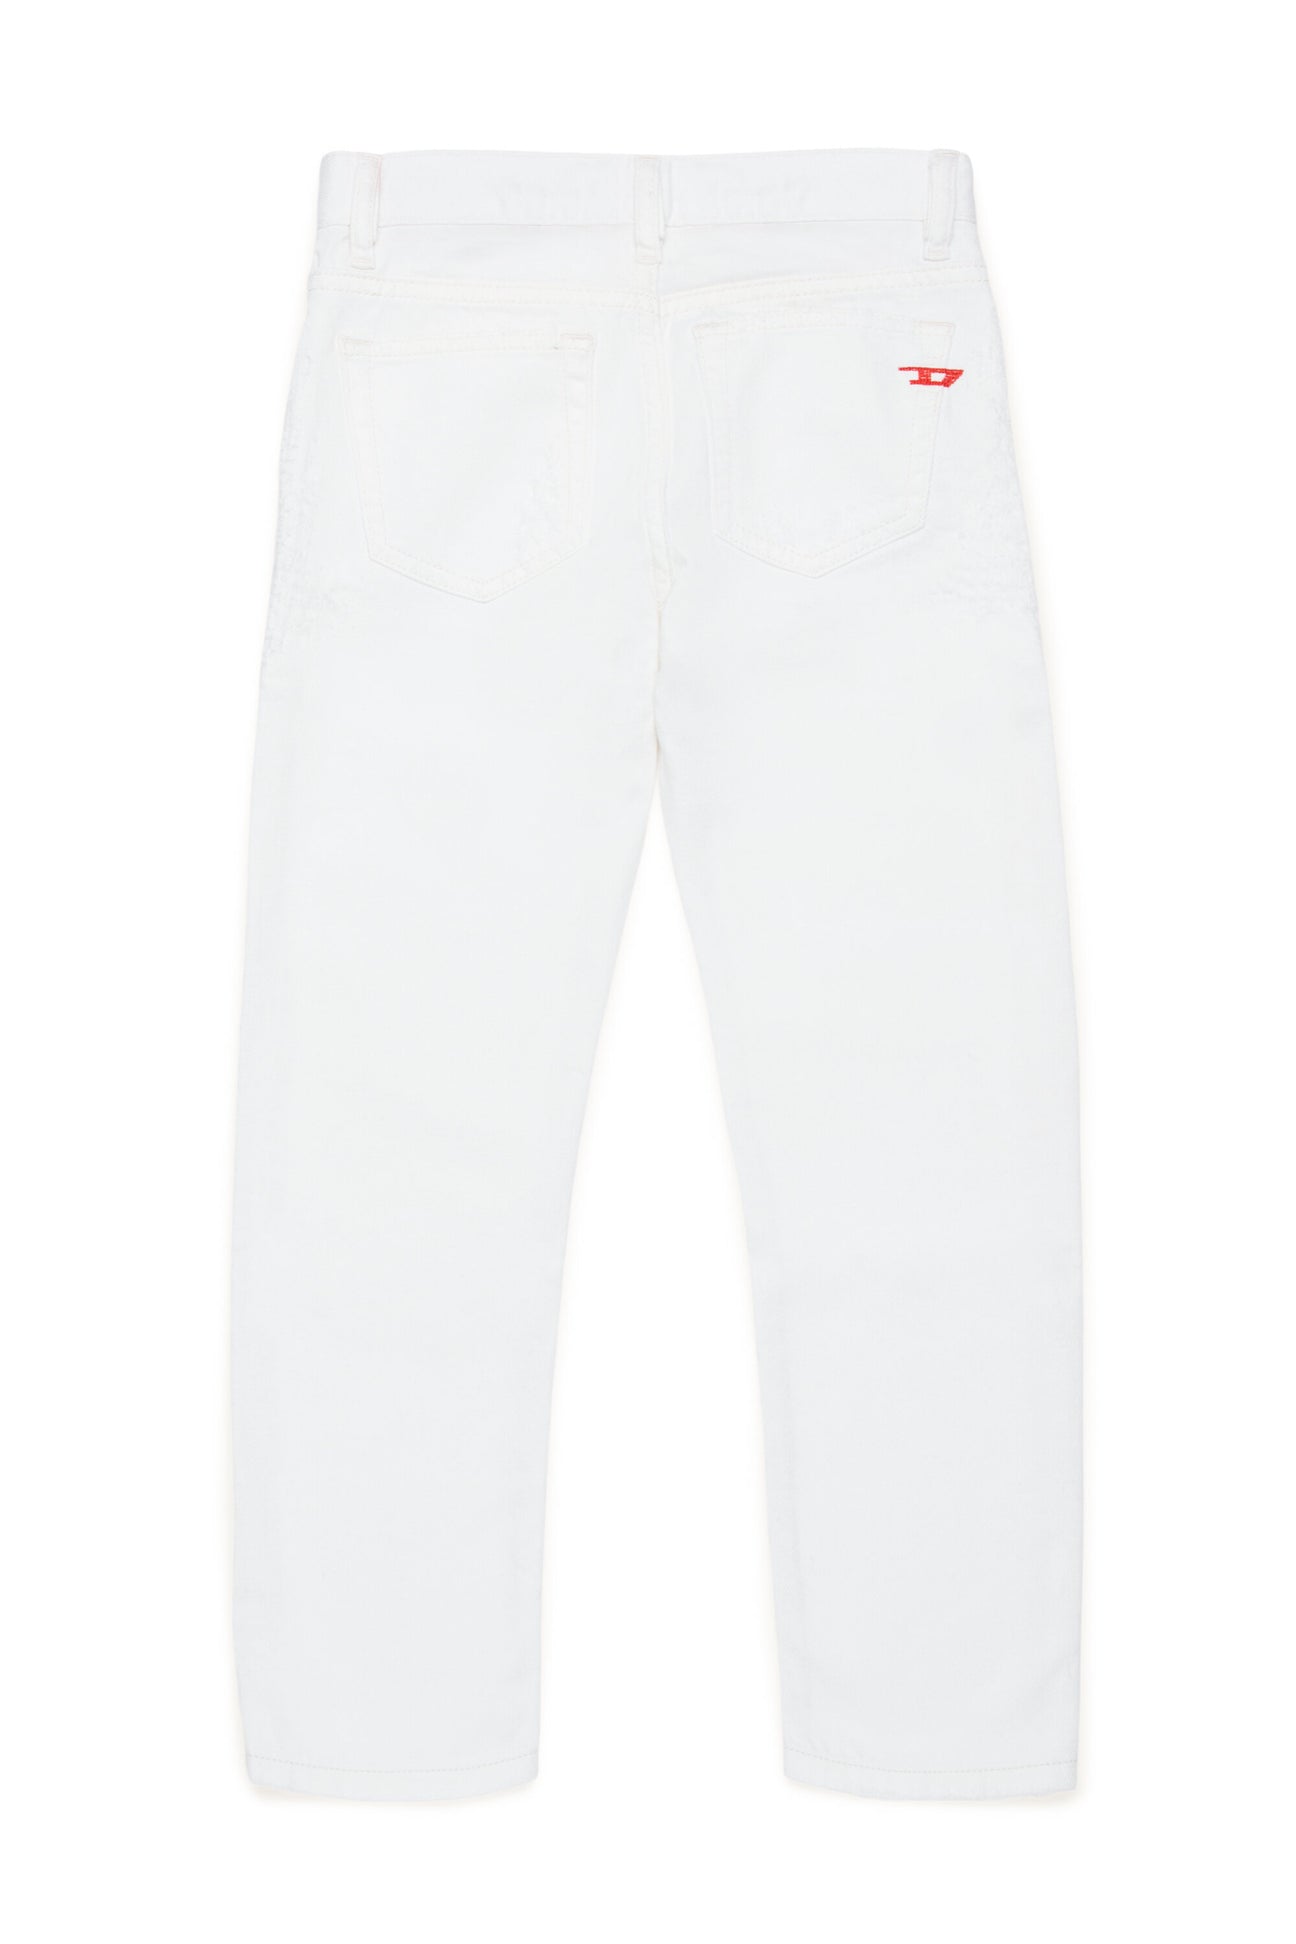 White straight jeans with abrasions - 2020 D-Viker White straight jeans with abrasions - 2020 D-Viker